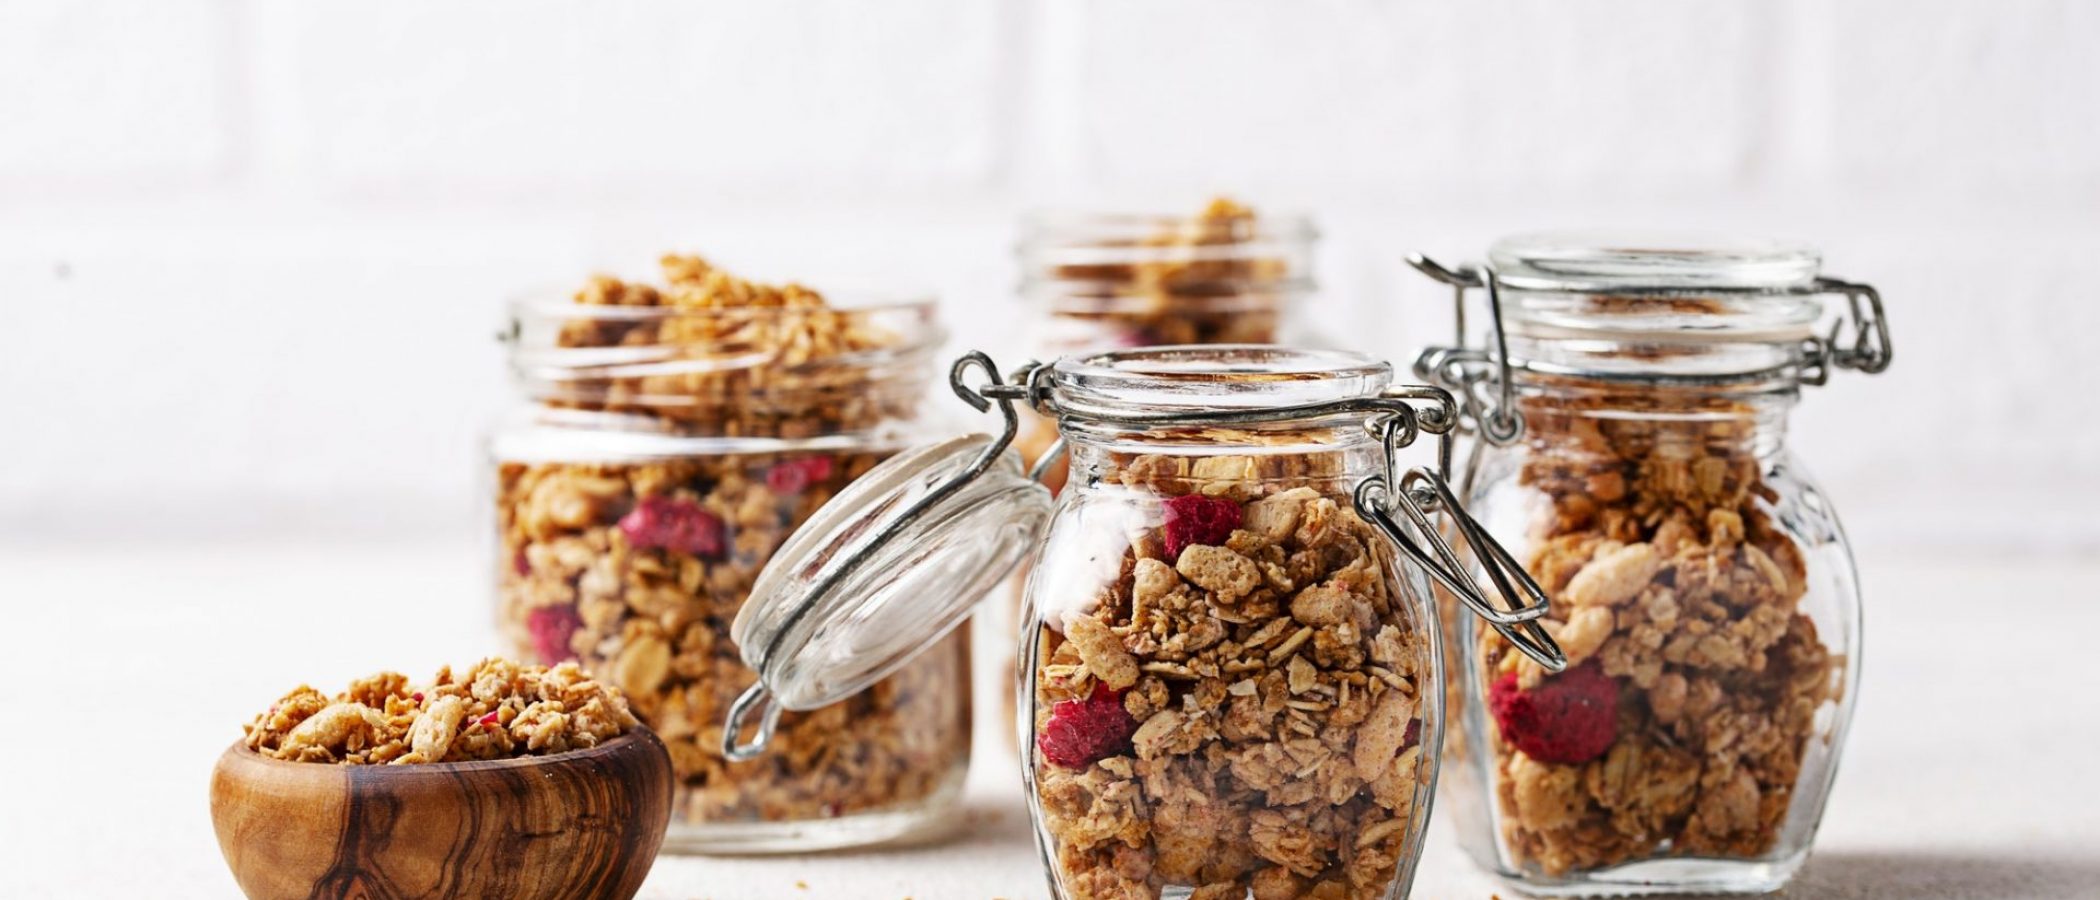 Homemade granola with dried berry